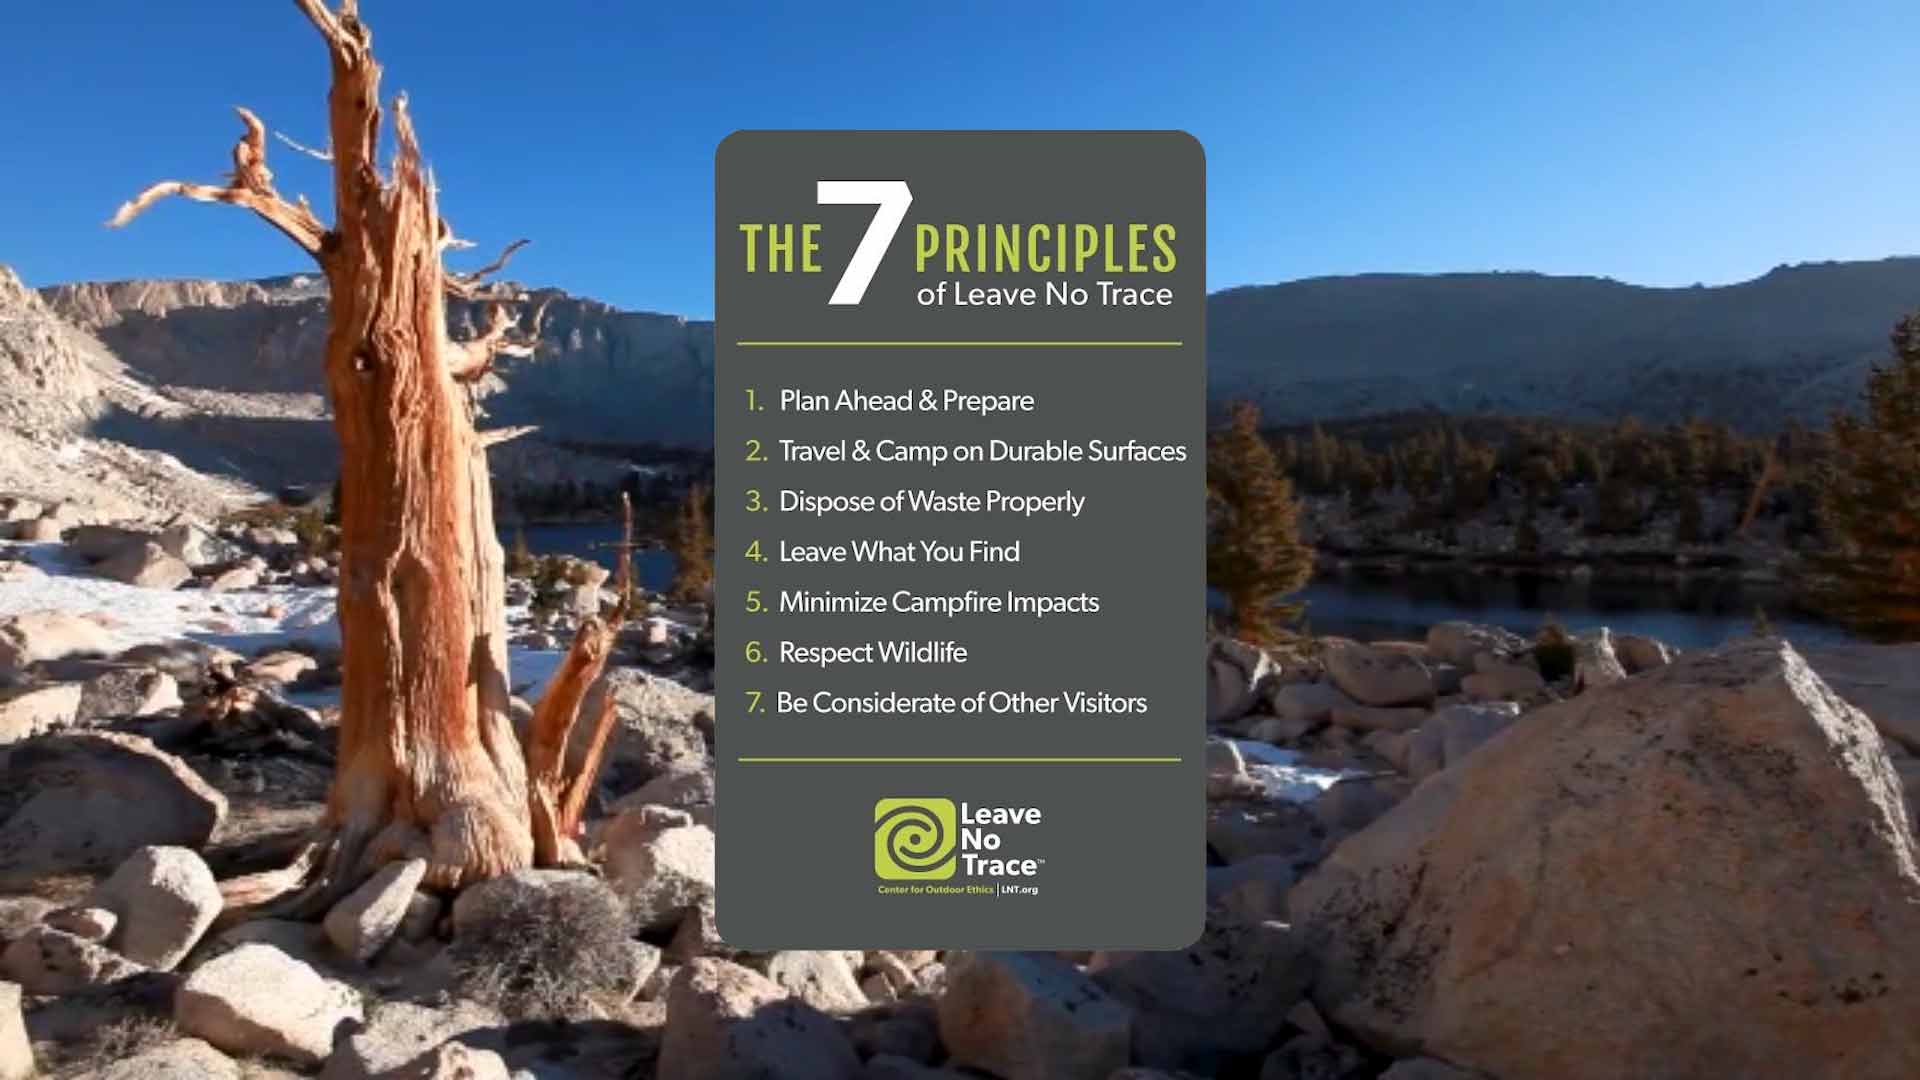 7 principles of leave no trace.